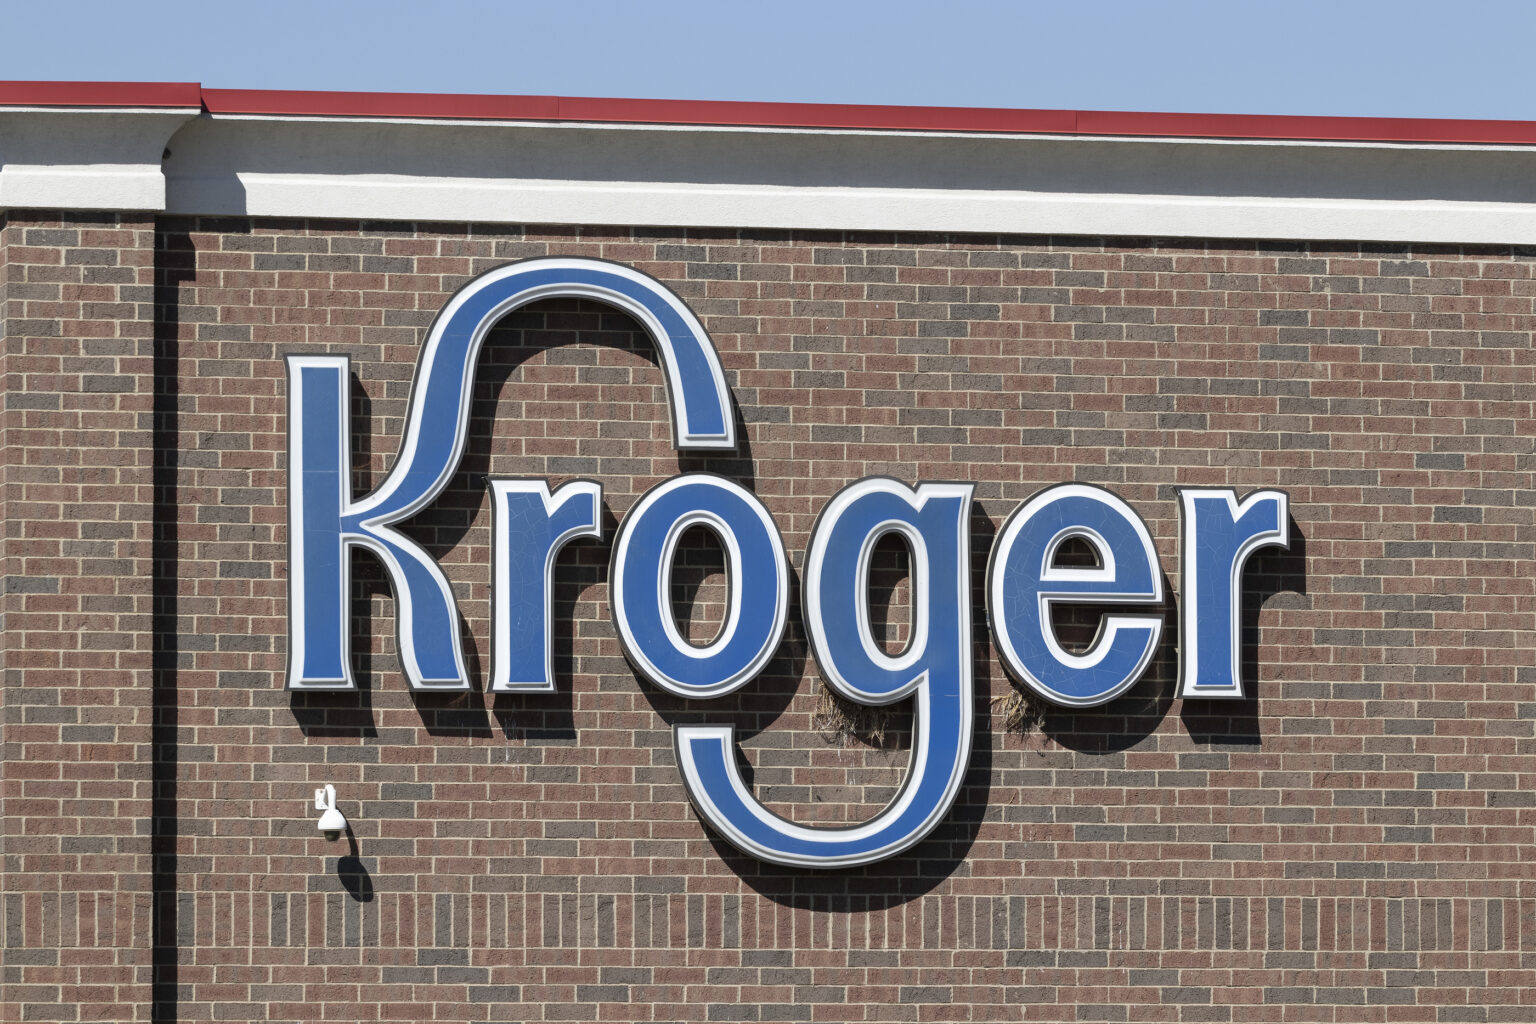 Kroger to Pay Up to $1.4 Billion to Resolve Opioid Lawsuits